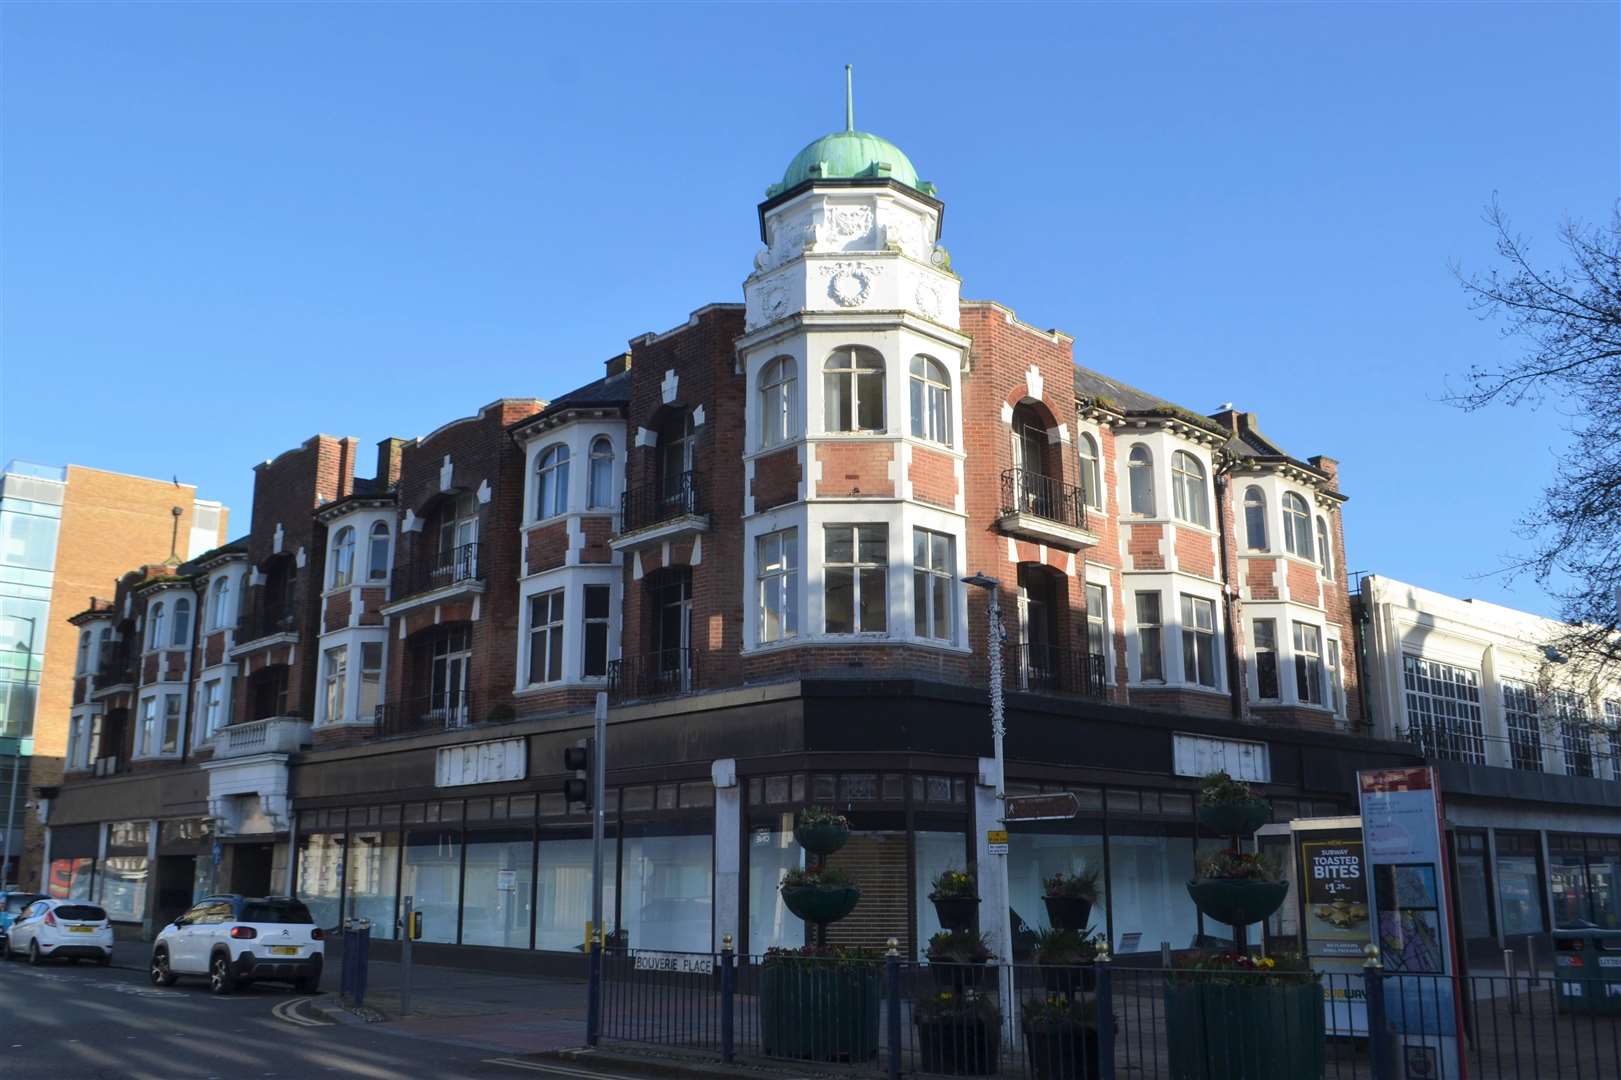 The former Debenhams store in Folkestone was purchased by the council earlier this year